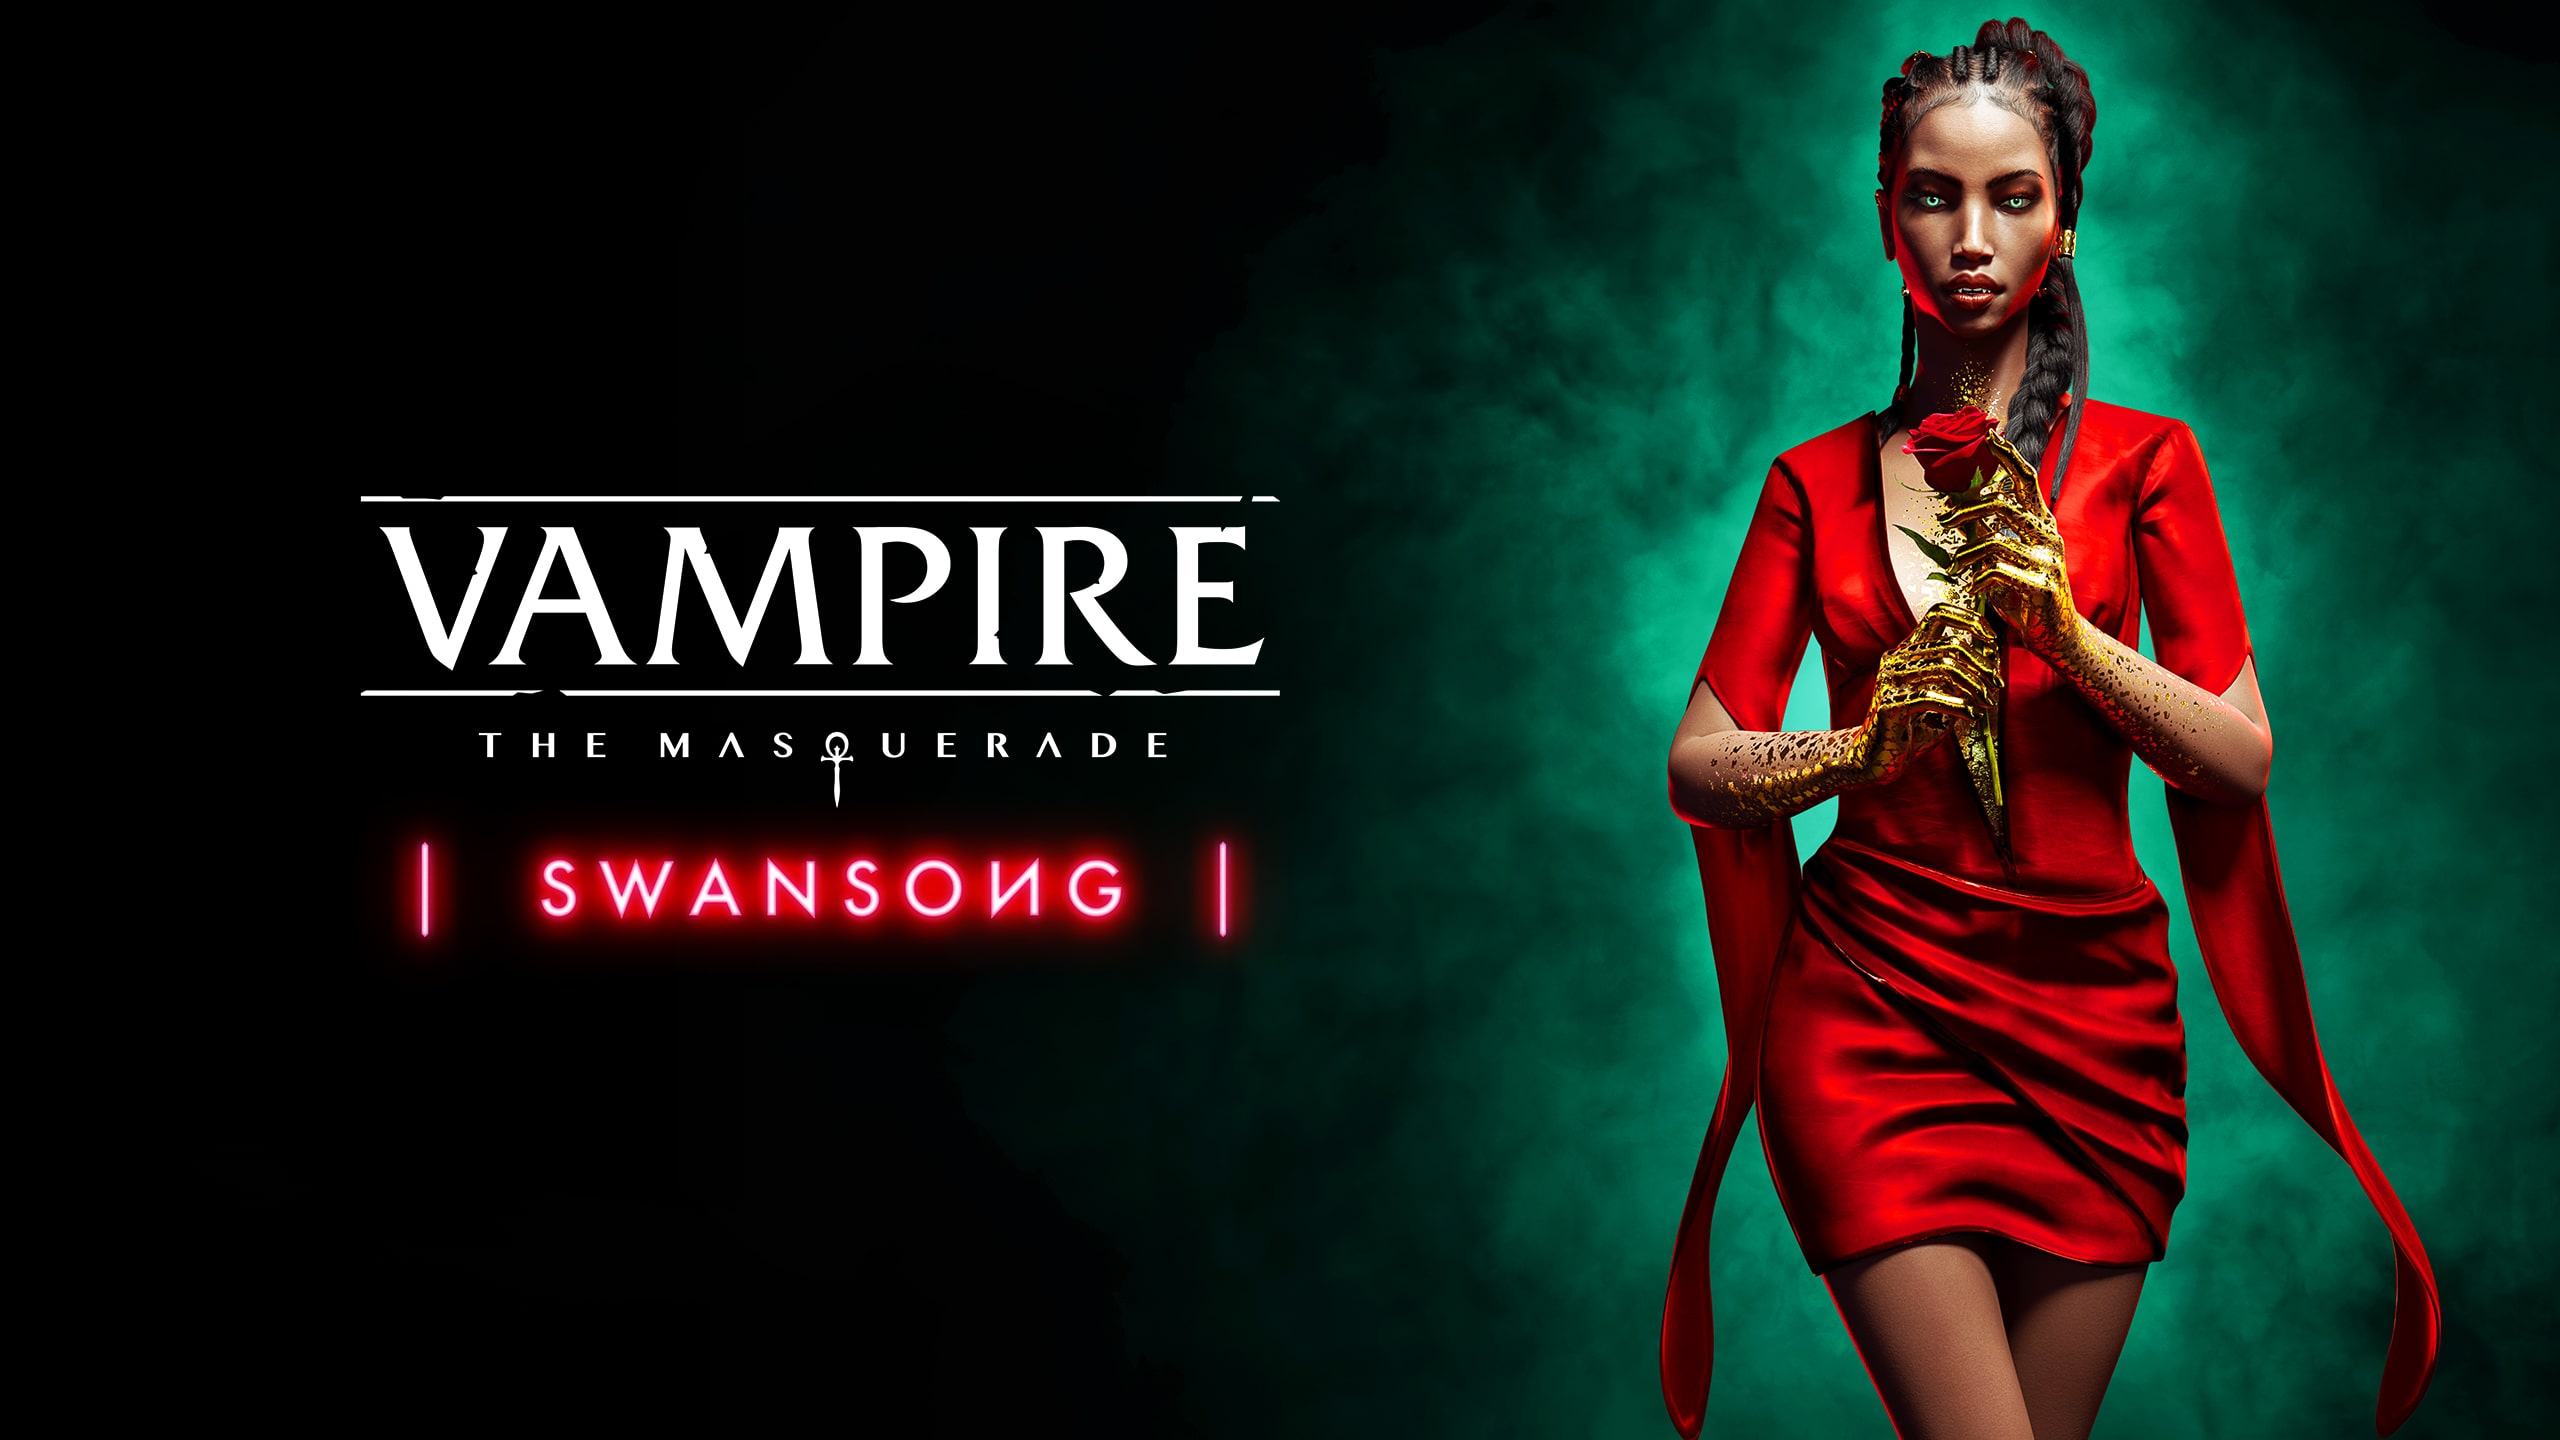 Vampire: The Masquerade - Swansong: what is the safe code?